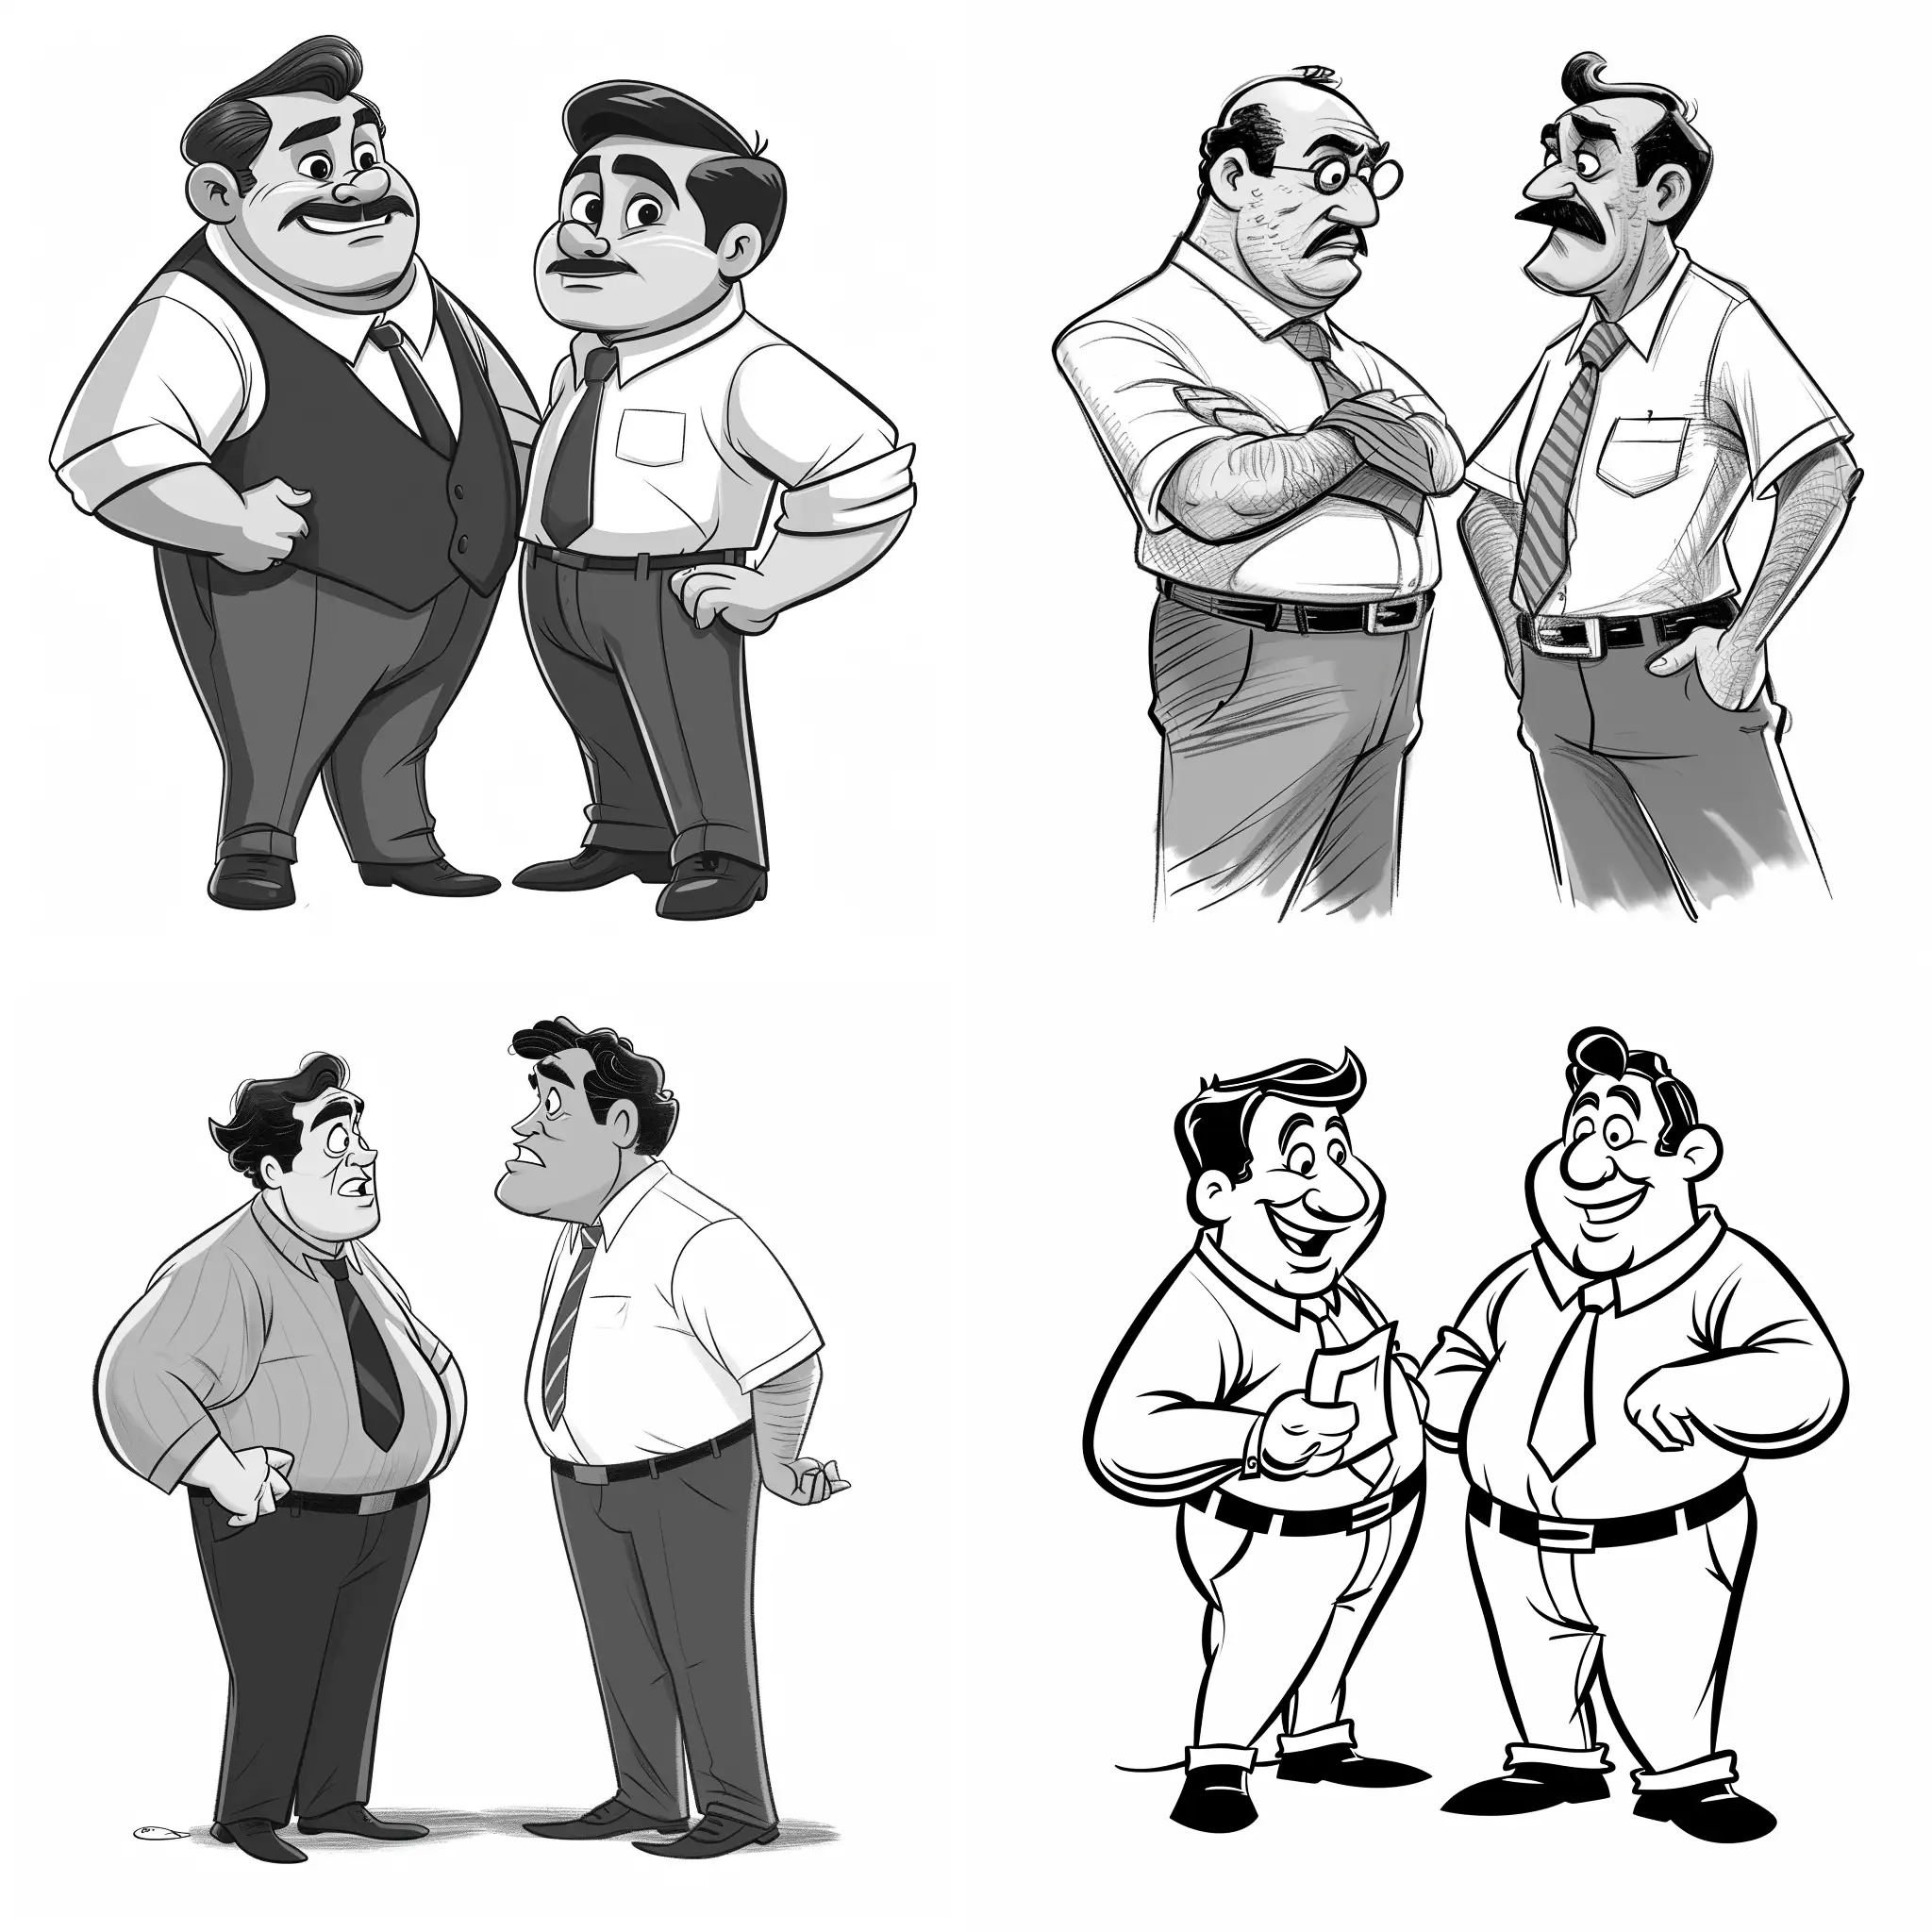 Disney-Cartoon-Manager-Seller-in-Black-and-White